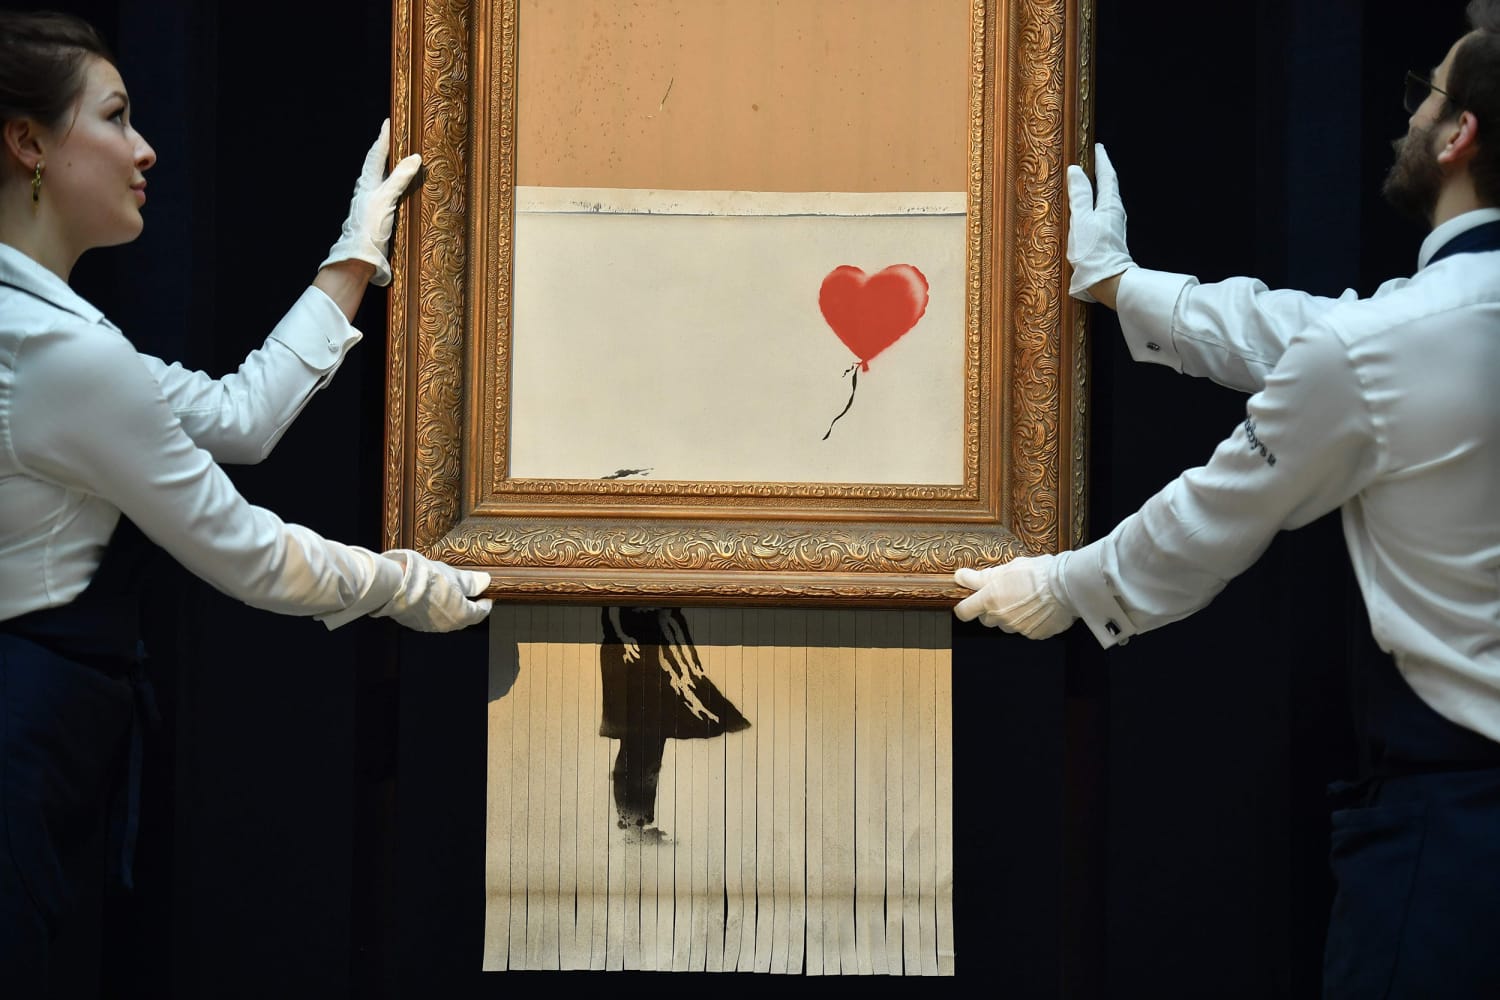 Banksy's shredded painting stunt was viral performance art. But who was  really trolling who?